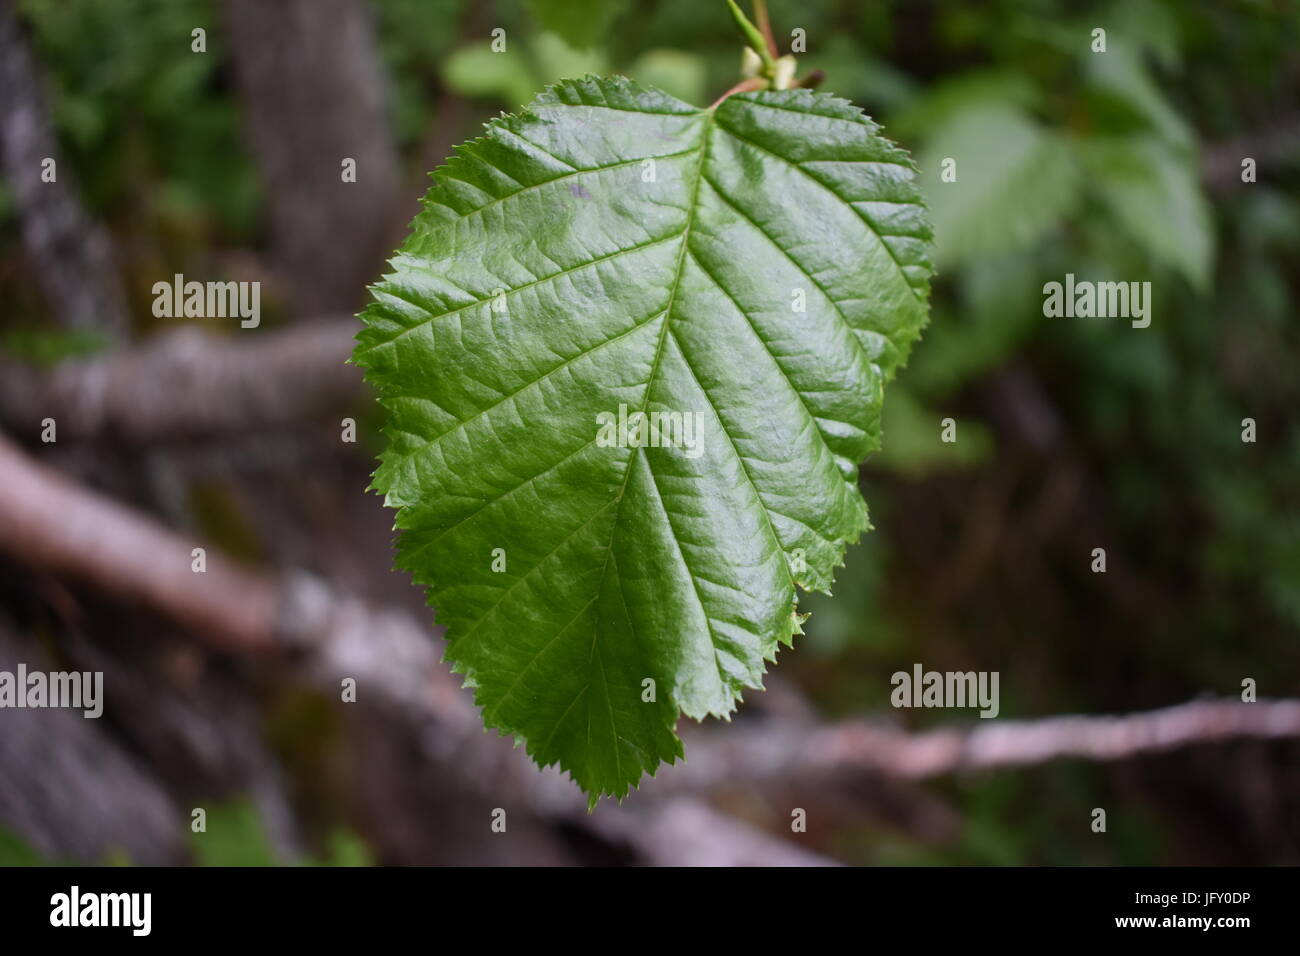 Close up of a leaf found in the Alaskan wilderness Stock Photo